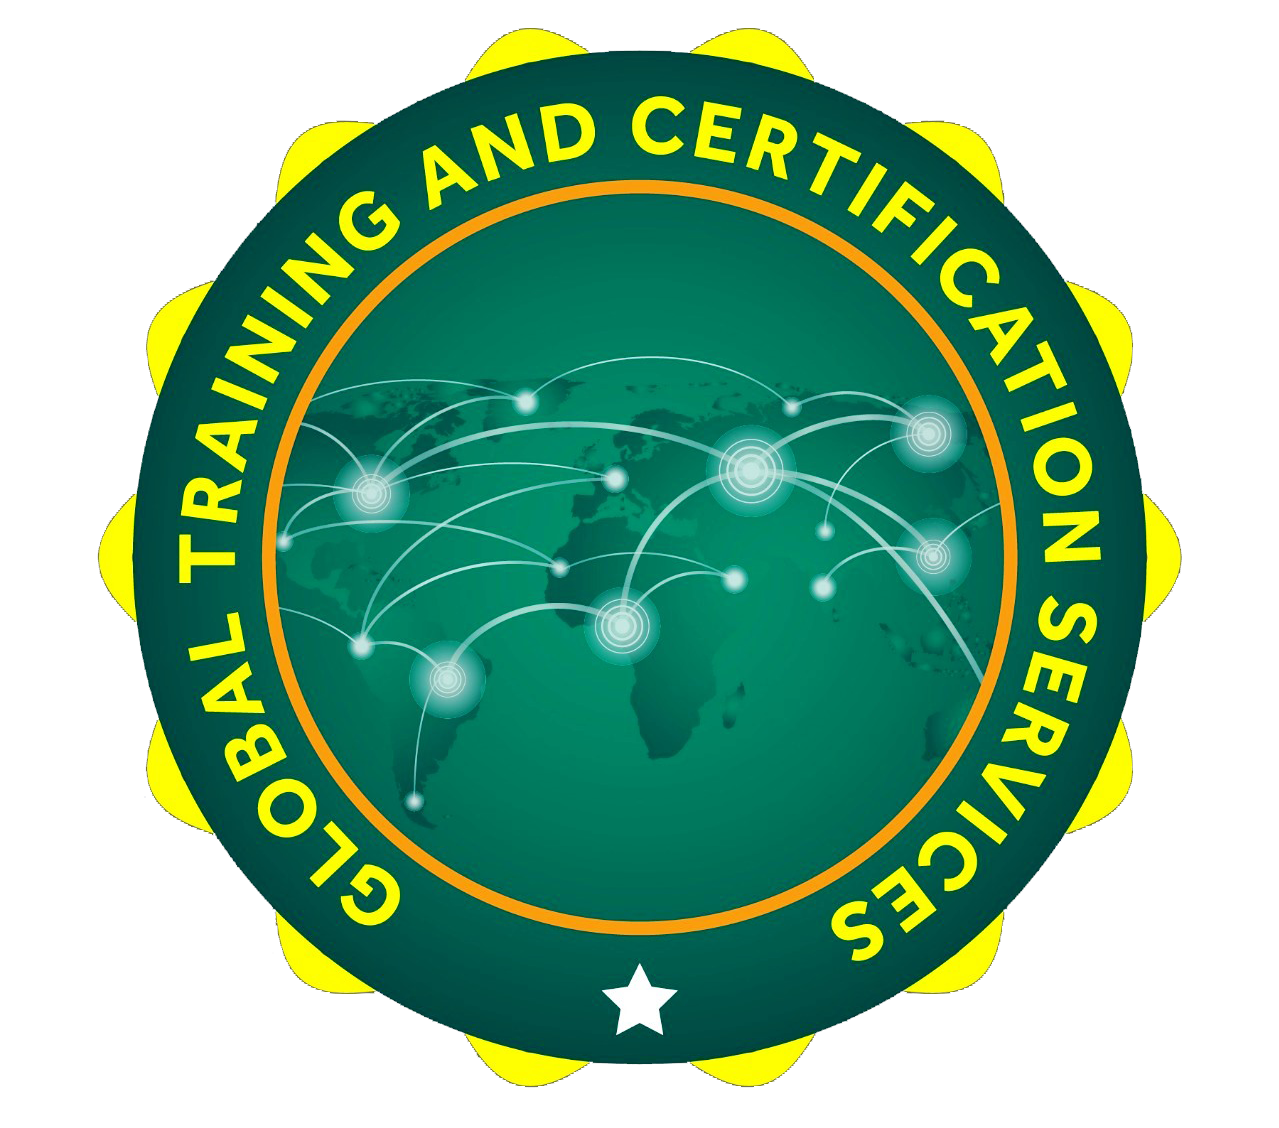 The Global Training and Certification Services